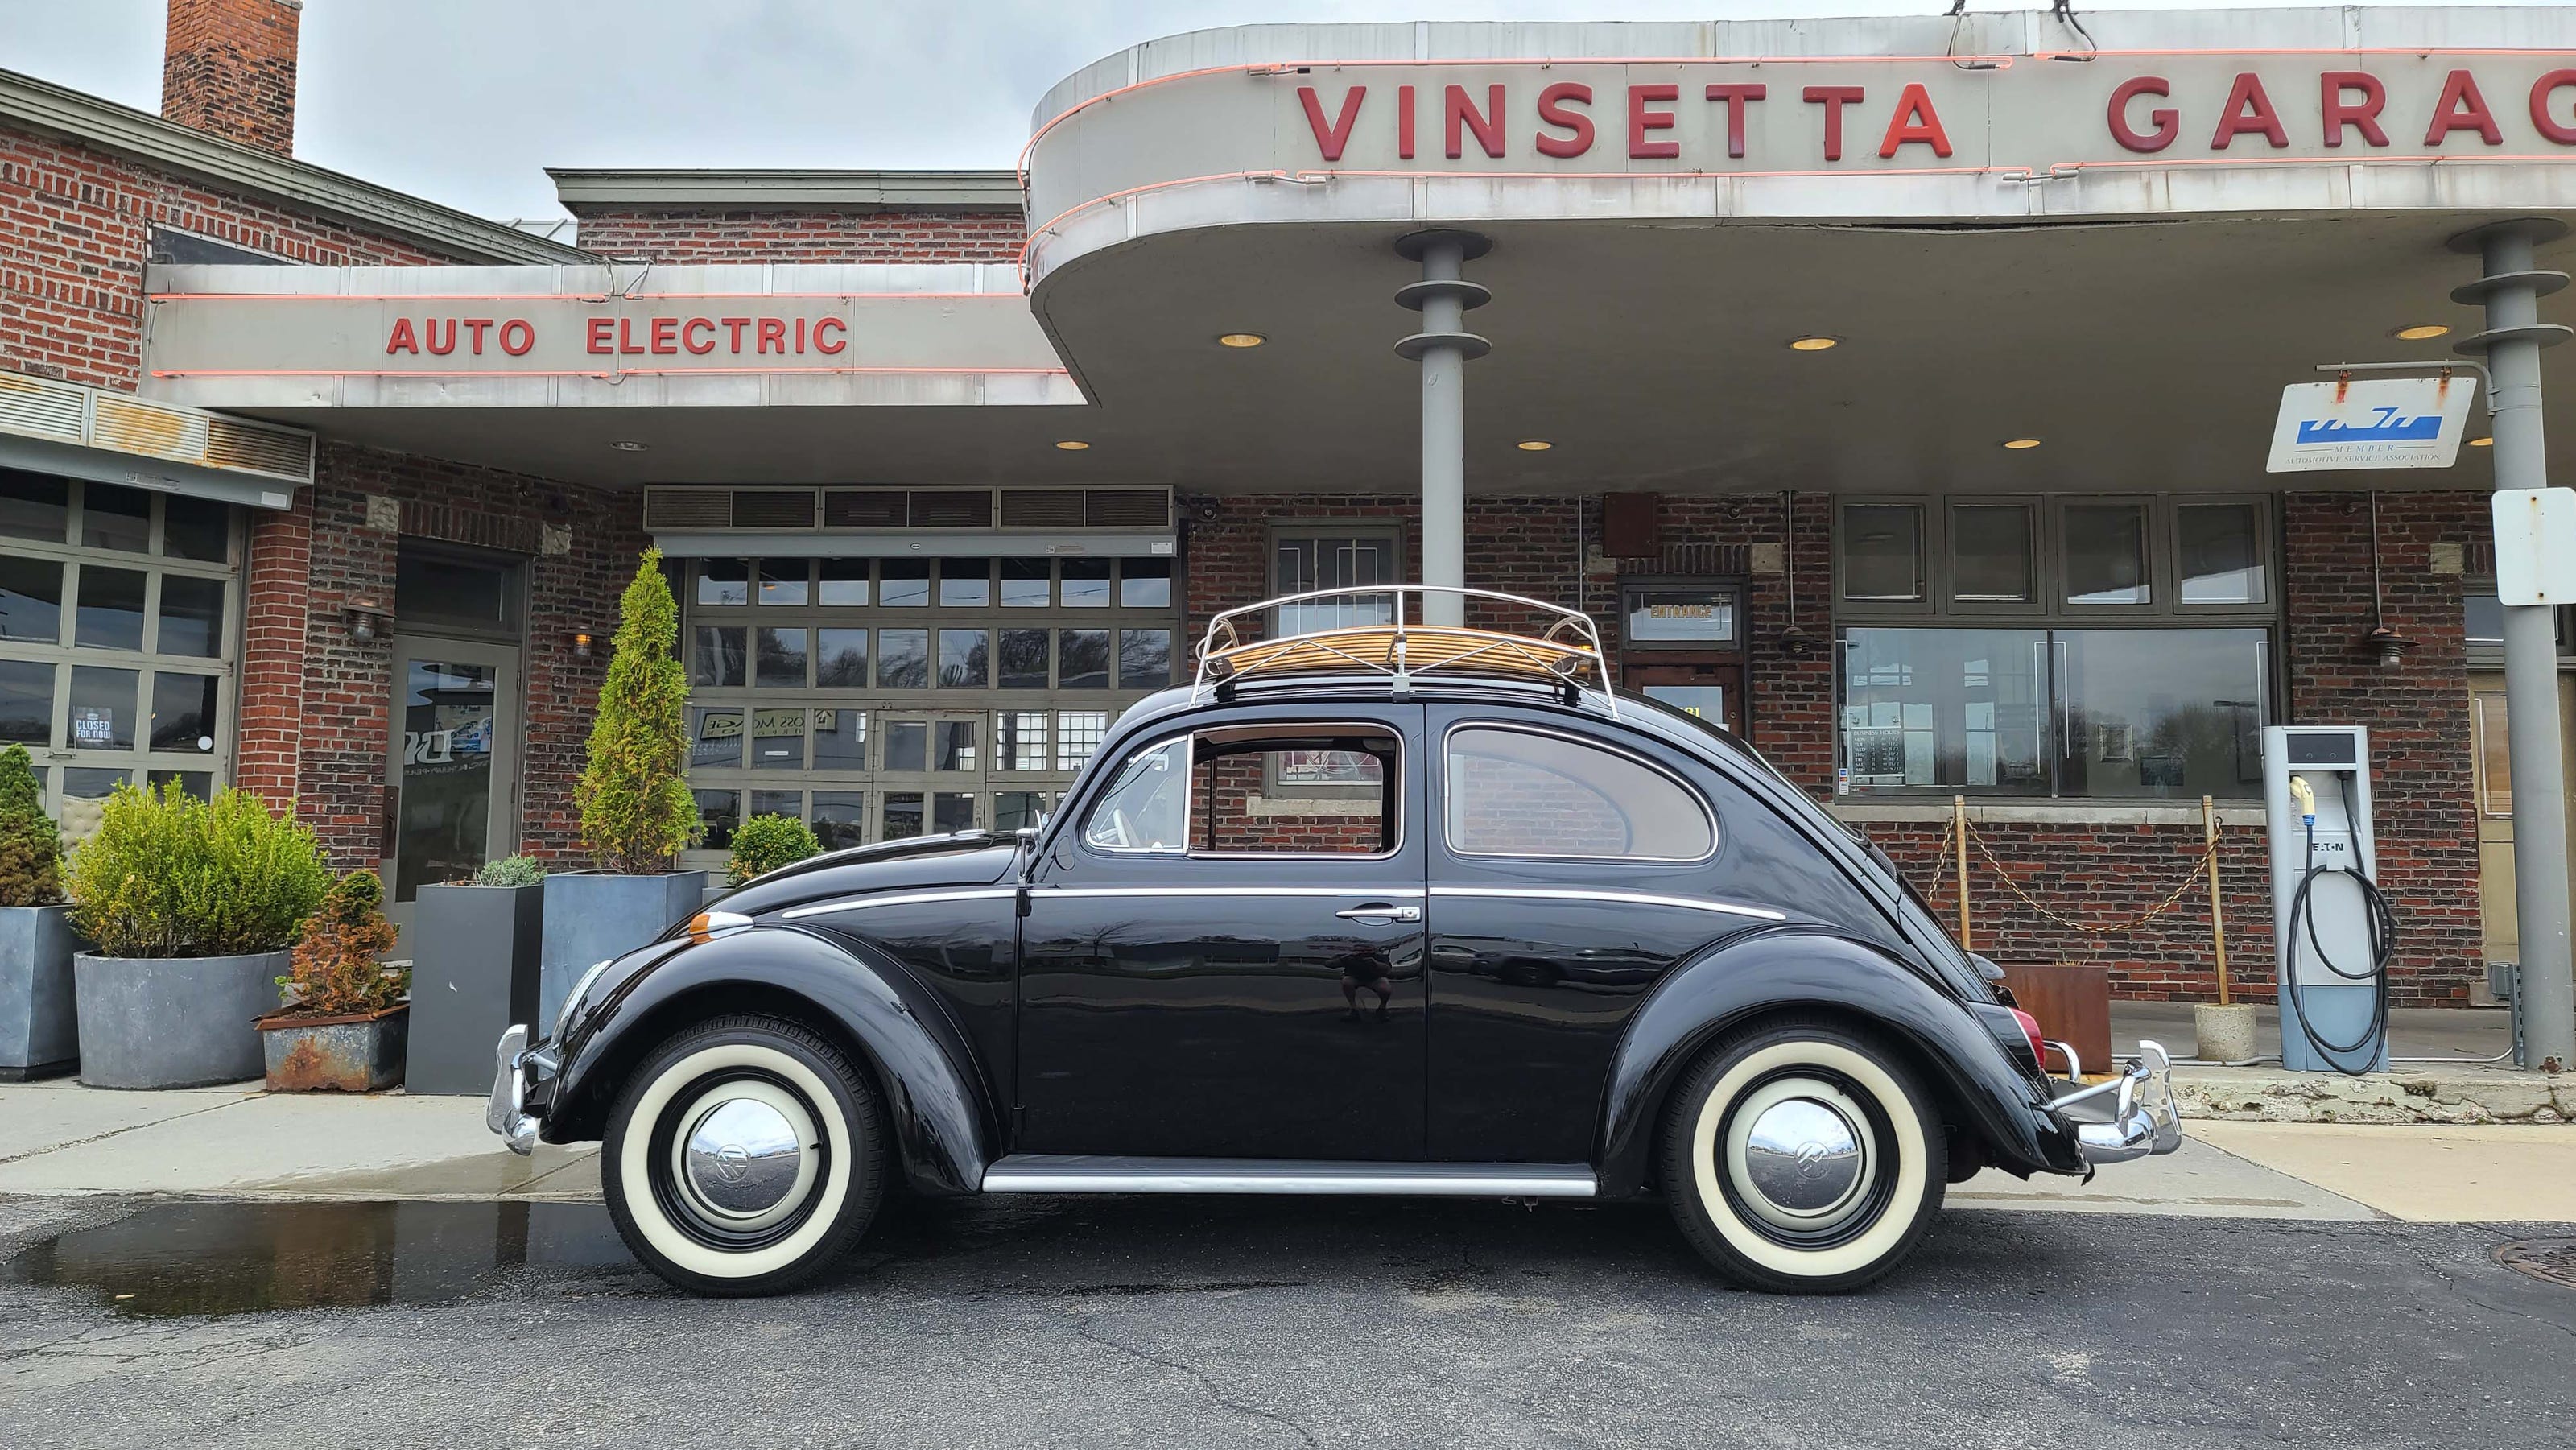 Turning back the clock in a '64 VW Beetle